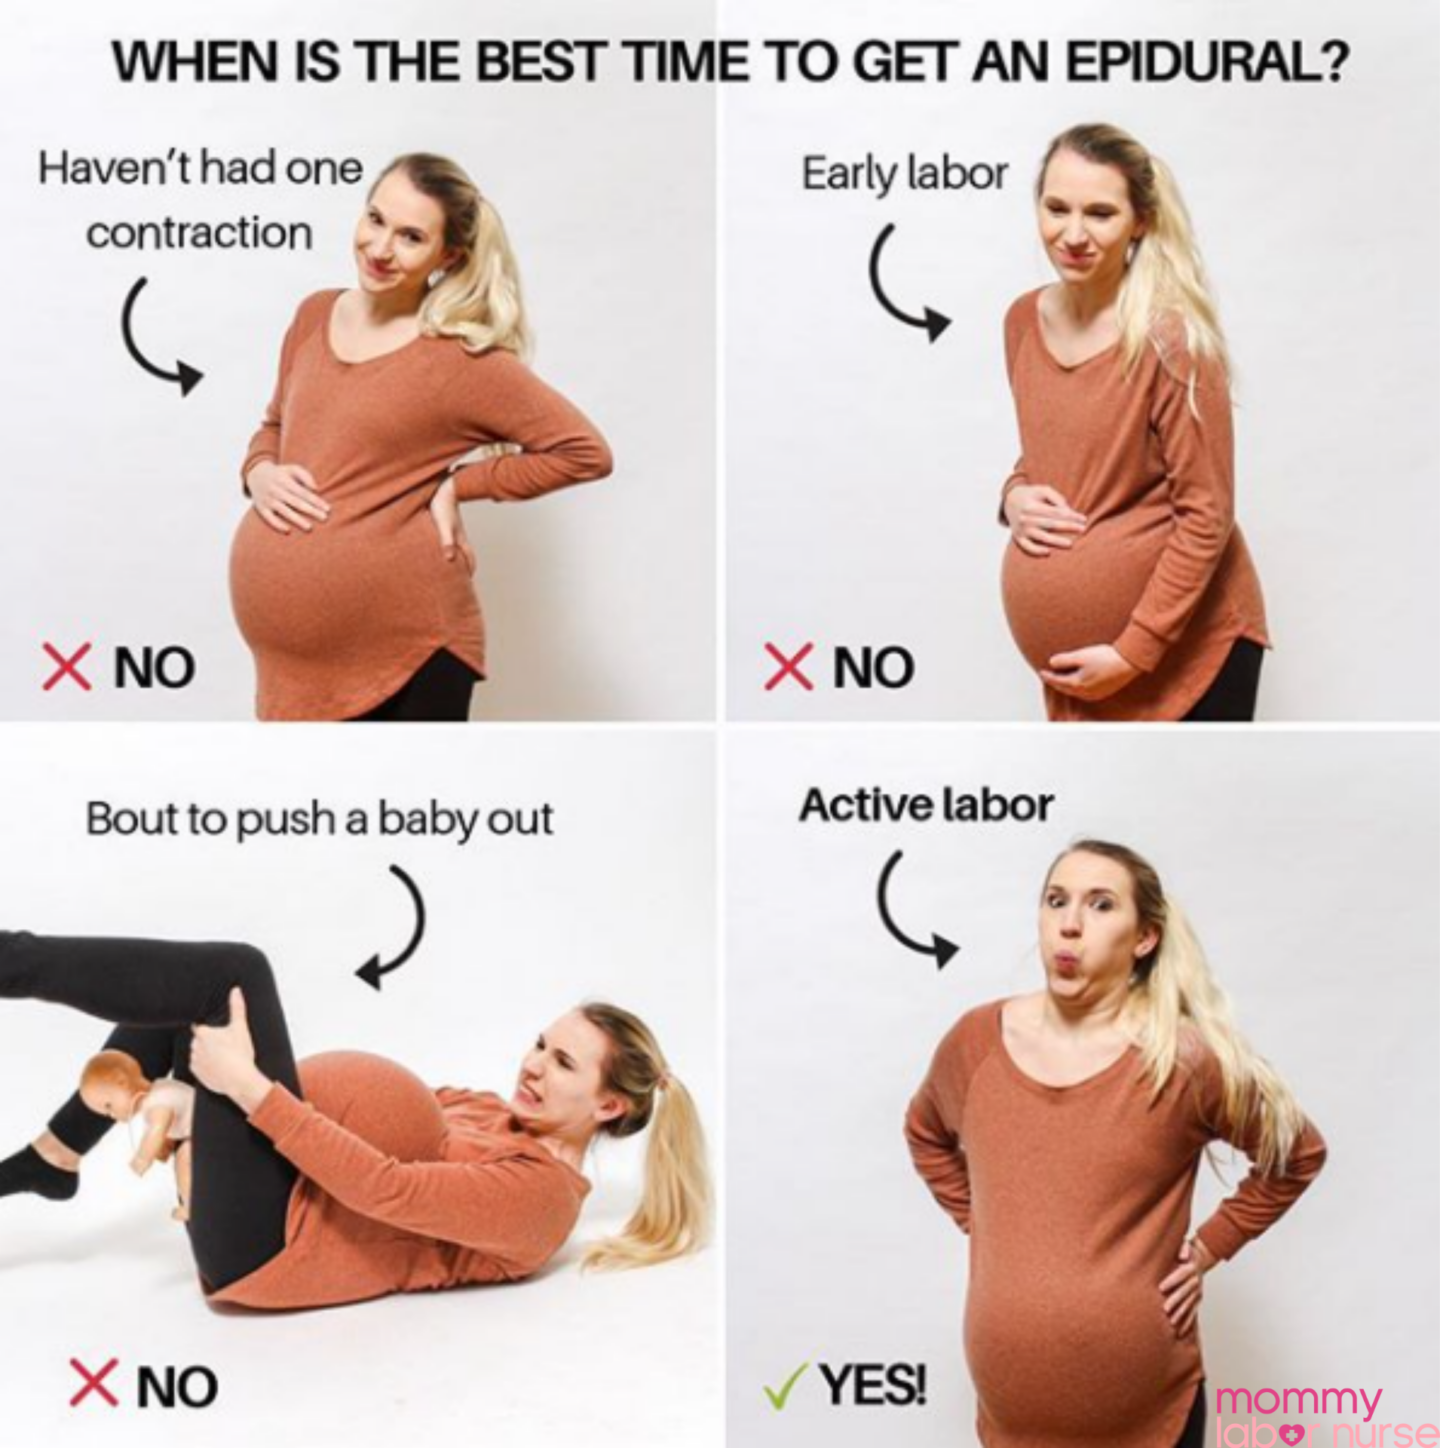 gest time to get epidural infographic